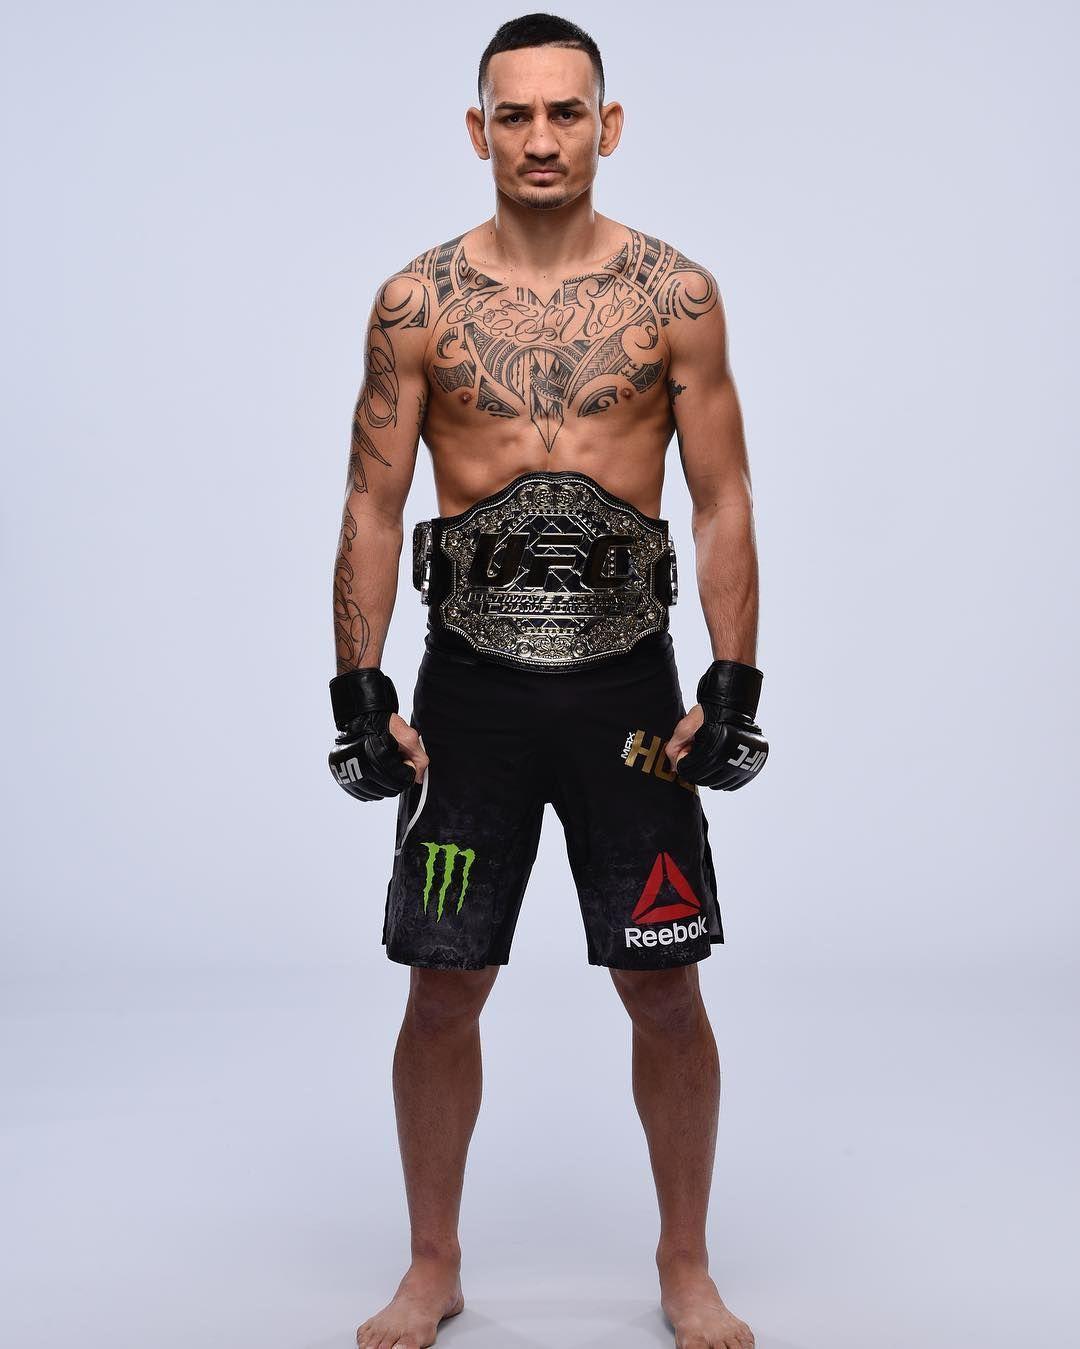 Max Holloway “The featherweight champ”. POPxUFC